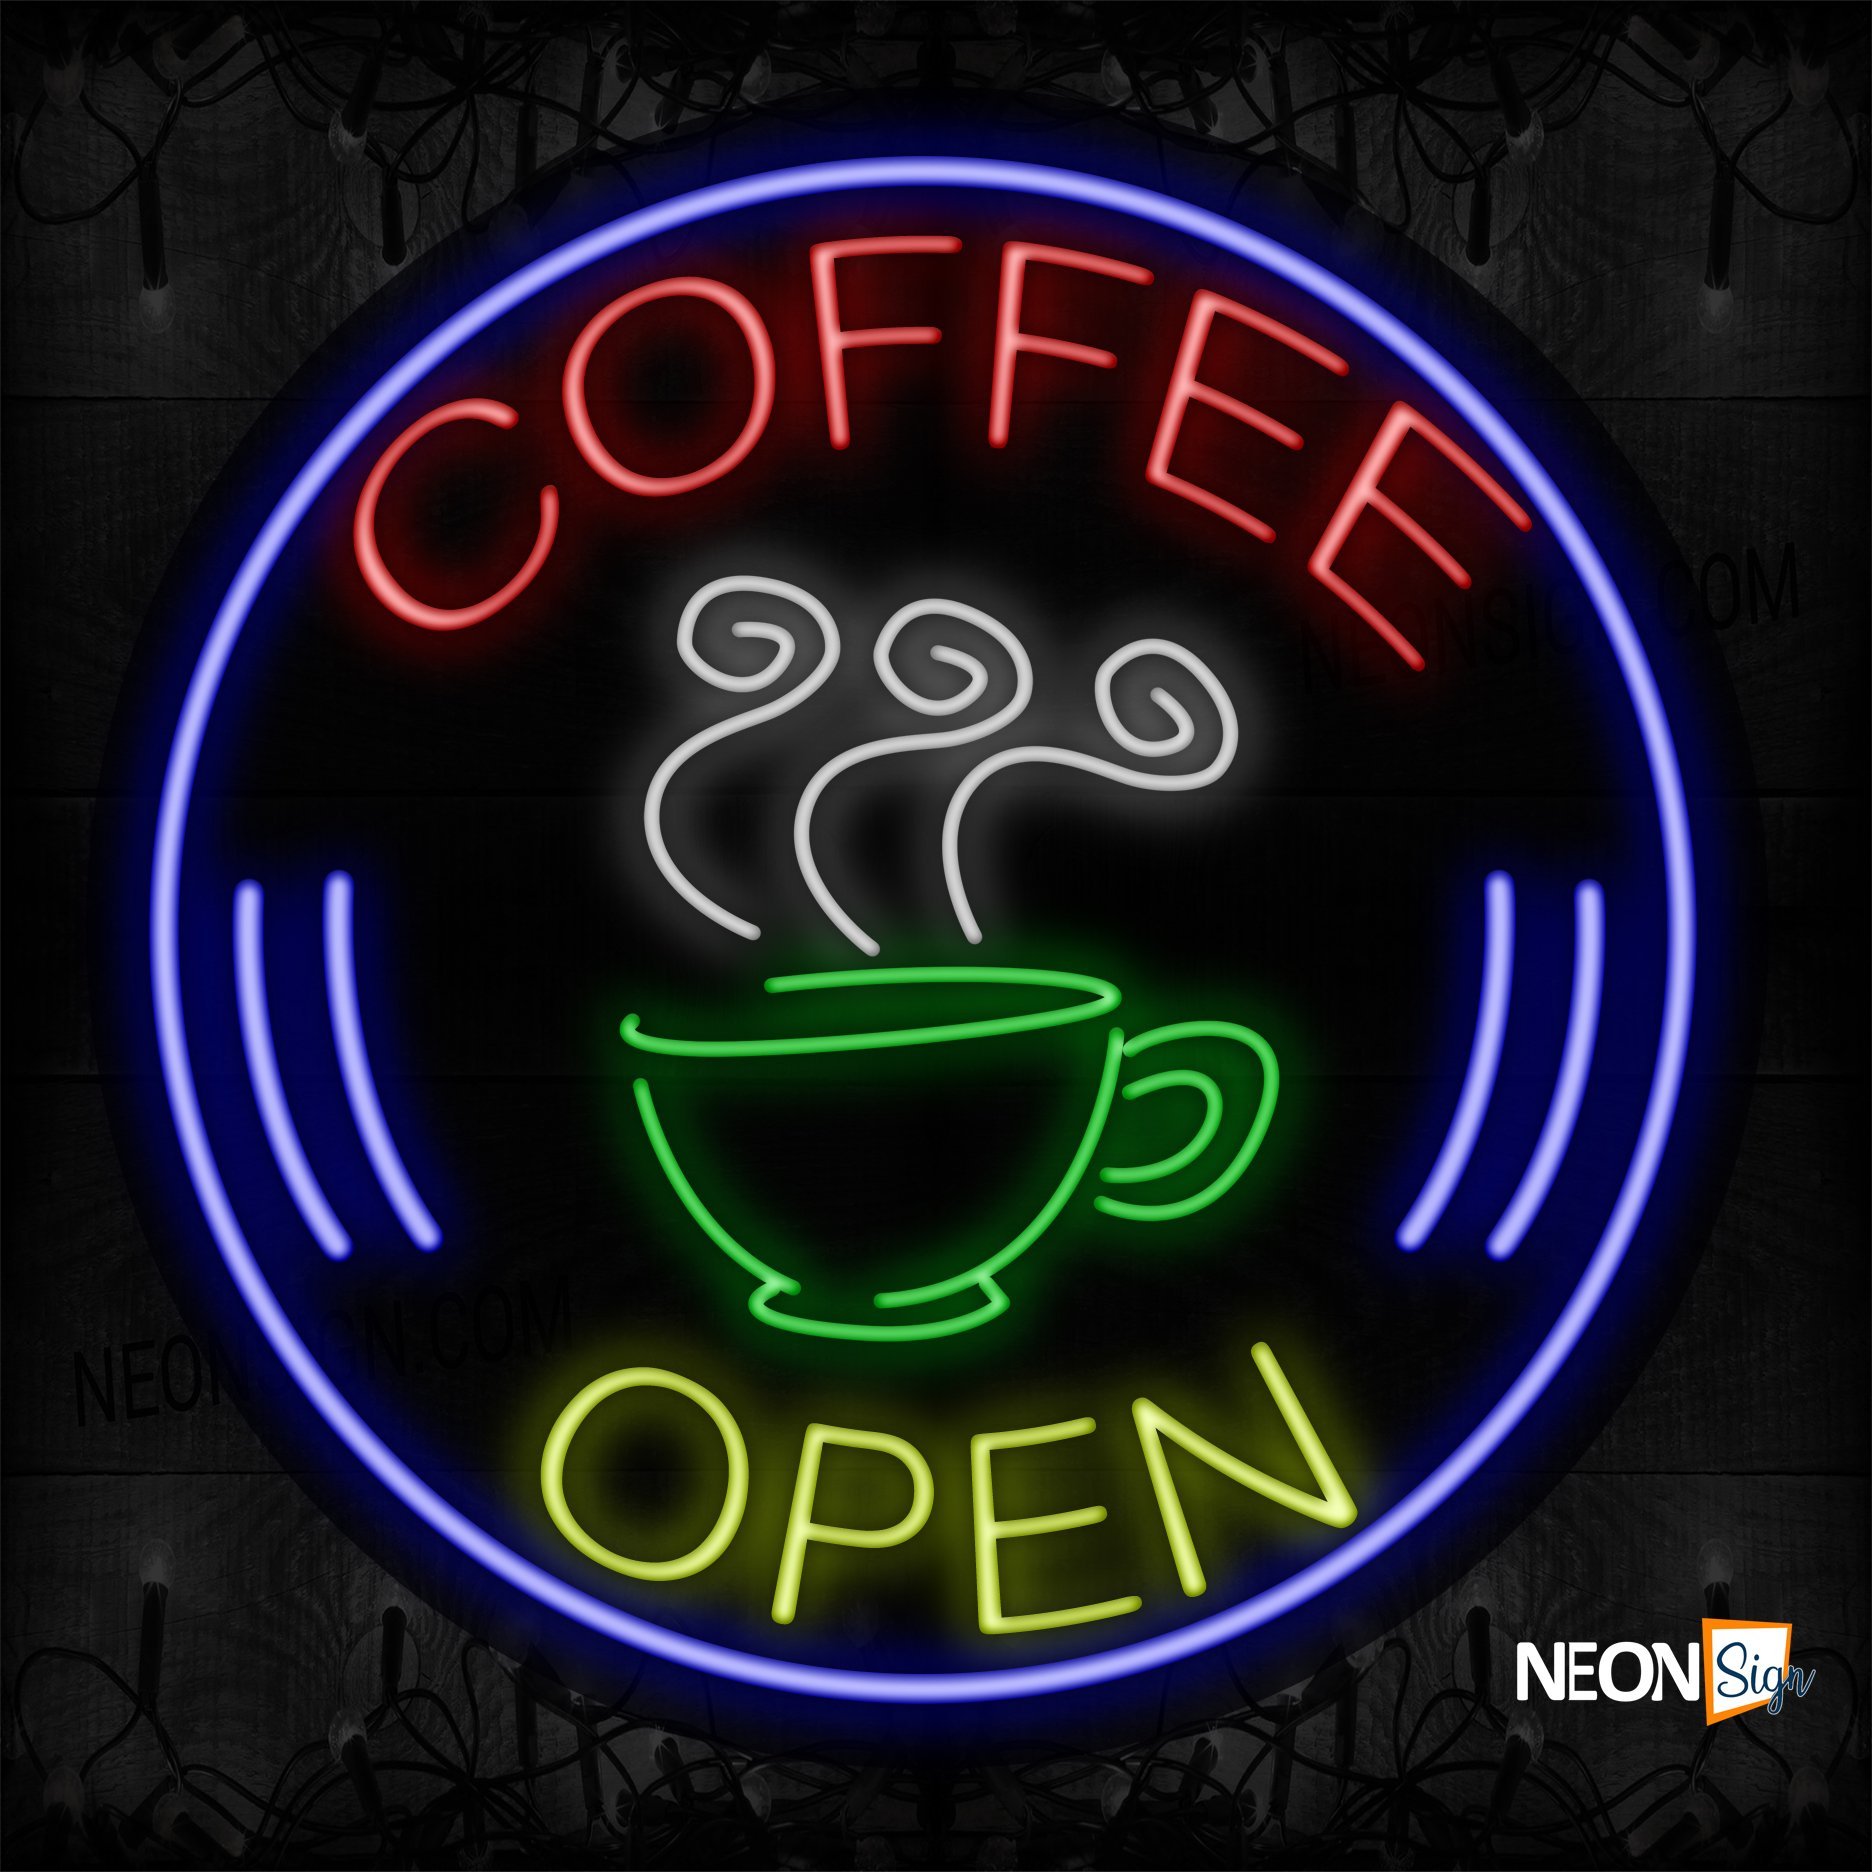 Image of 11135 Coffee Open With Circle Border Neon Signs_26x26 Contoured Black Backing